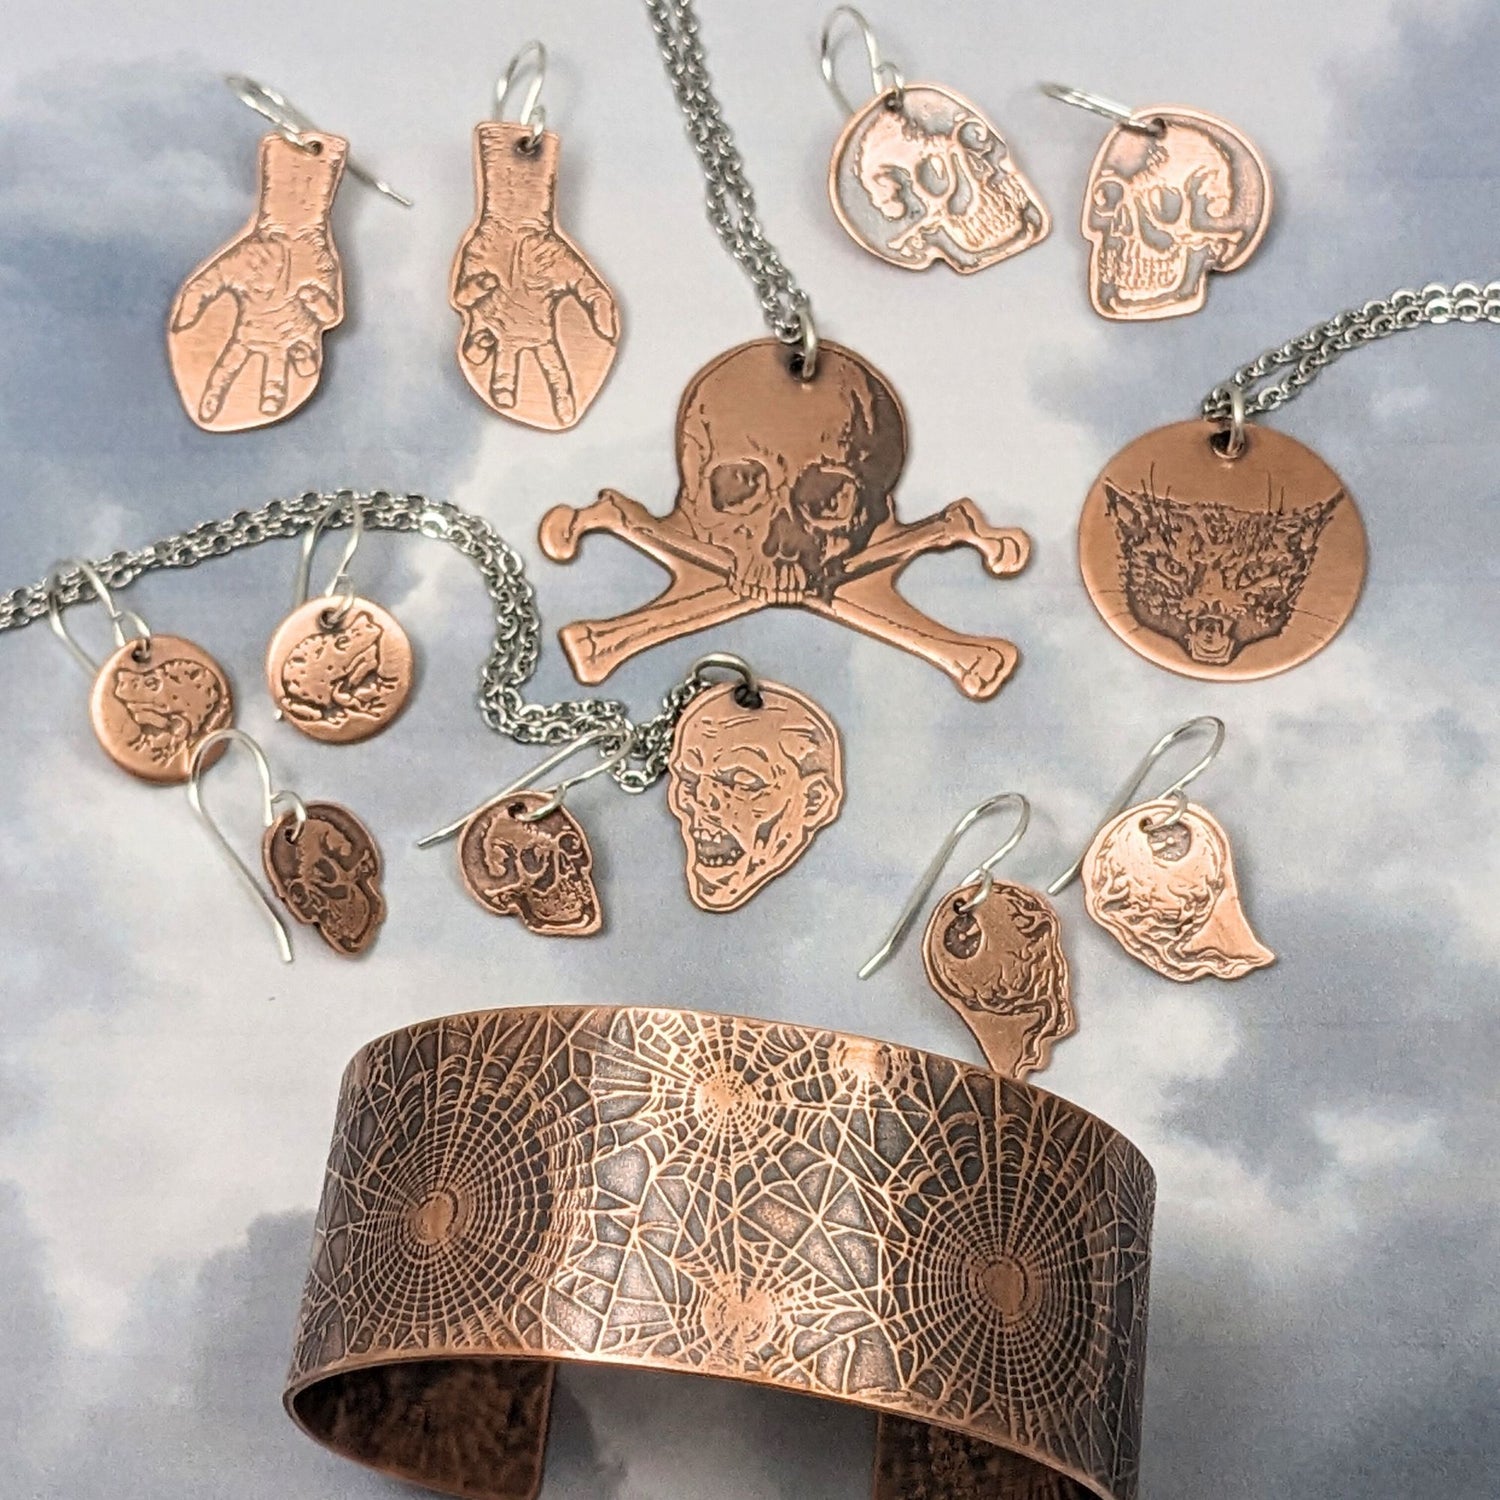 collection of halloween copper jewelry. Earrings are: hands, skulls, frogs, brains. Pendants are skull and crossbone, demon head, cat face. Cuff is spiderwebs